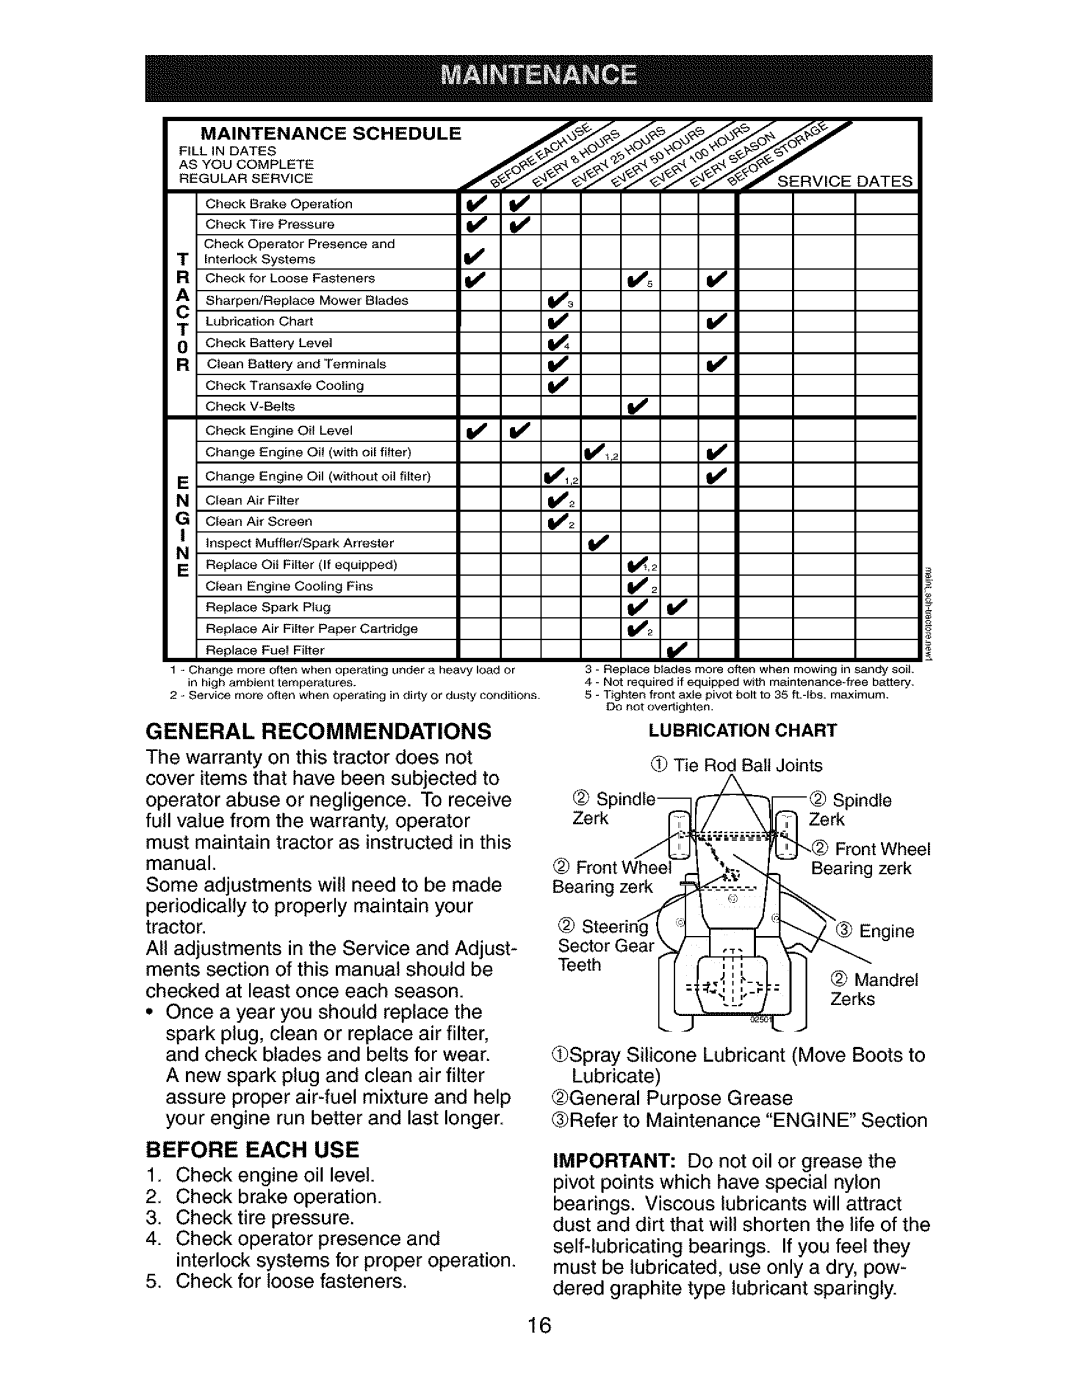 Craftsman 917.275283 owner manual FiLL,NOATES, General Recommendations, Before Each Use, Lubricate 